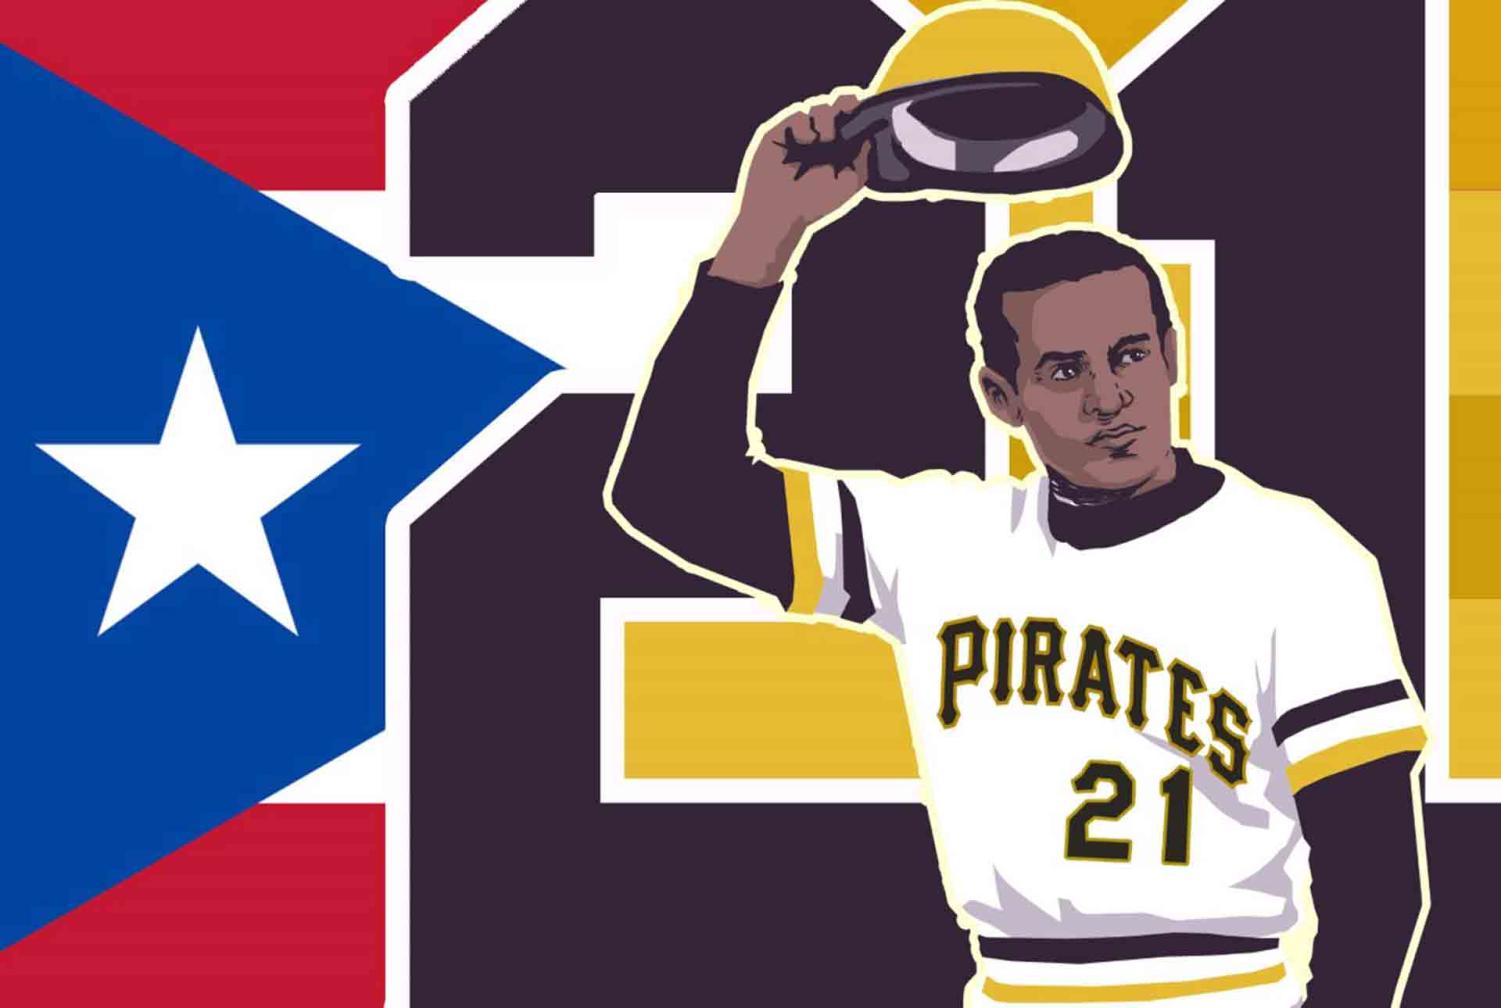 A Look at MLB's 2021 Roberto Clemente Day Uniforms